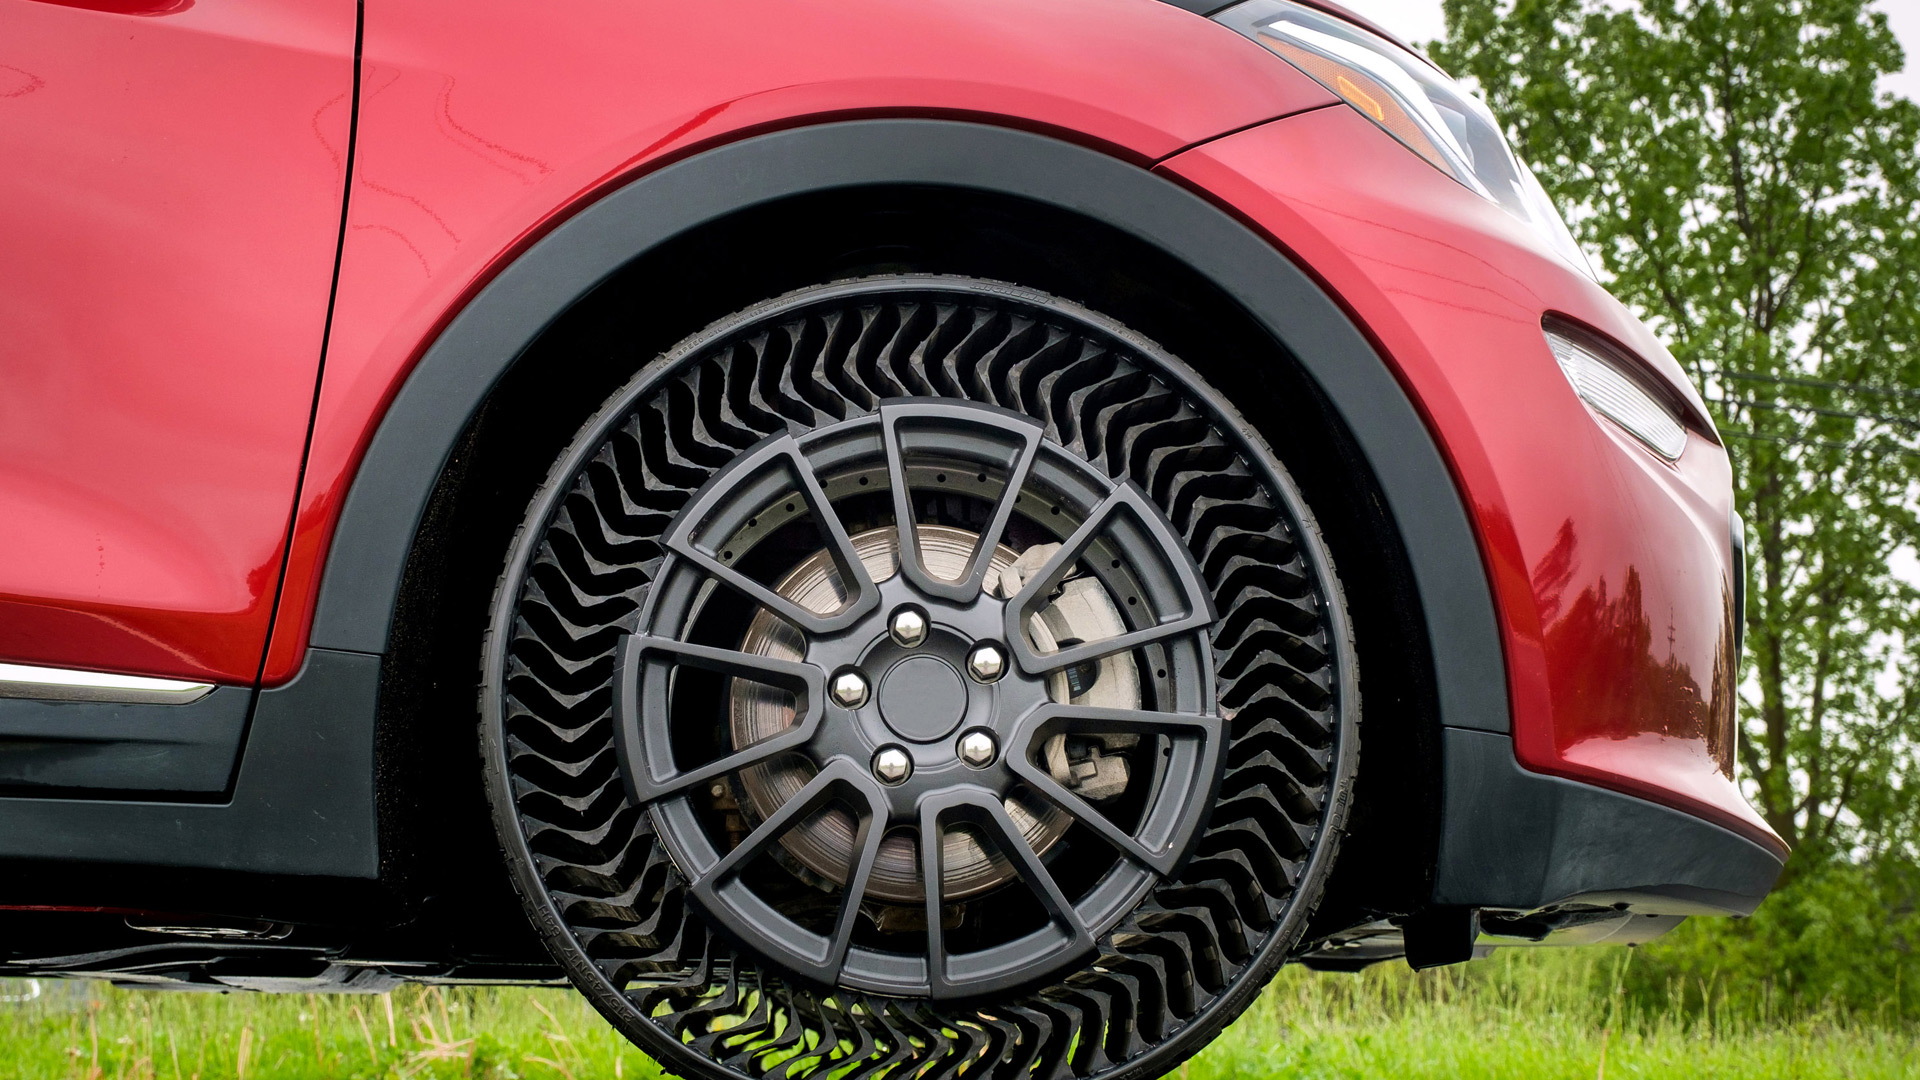 Chevrolet Bolt EV fitted with prototype airless tires from Michelin